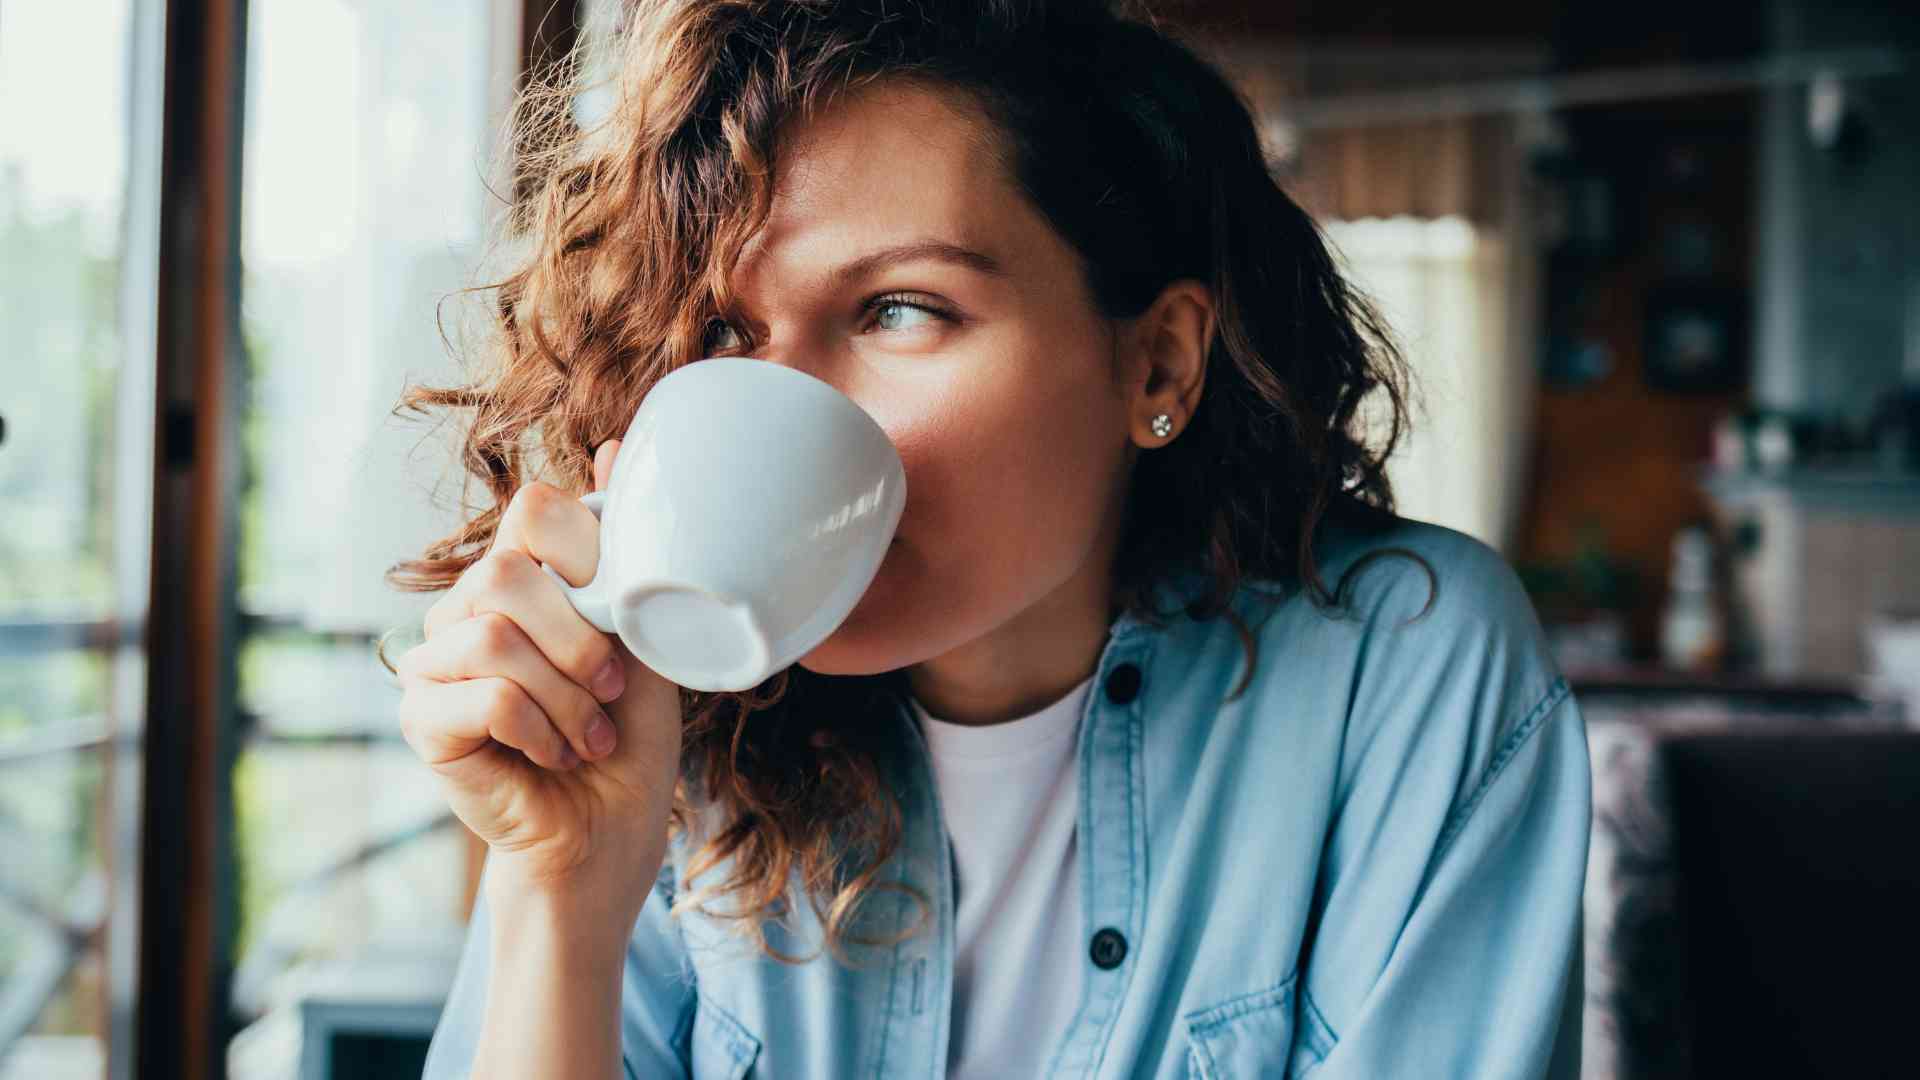 can drinking coffee cause hair loss